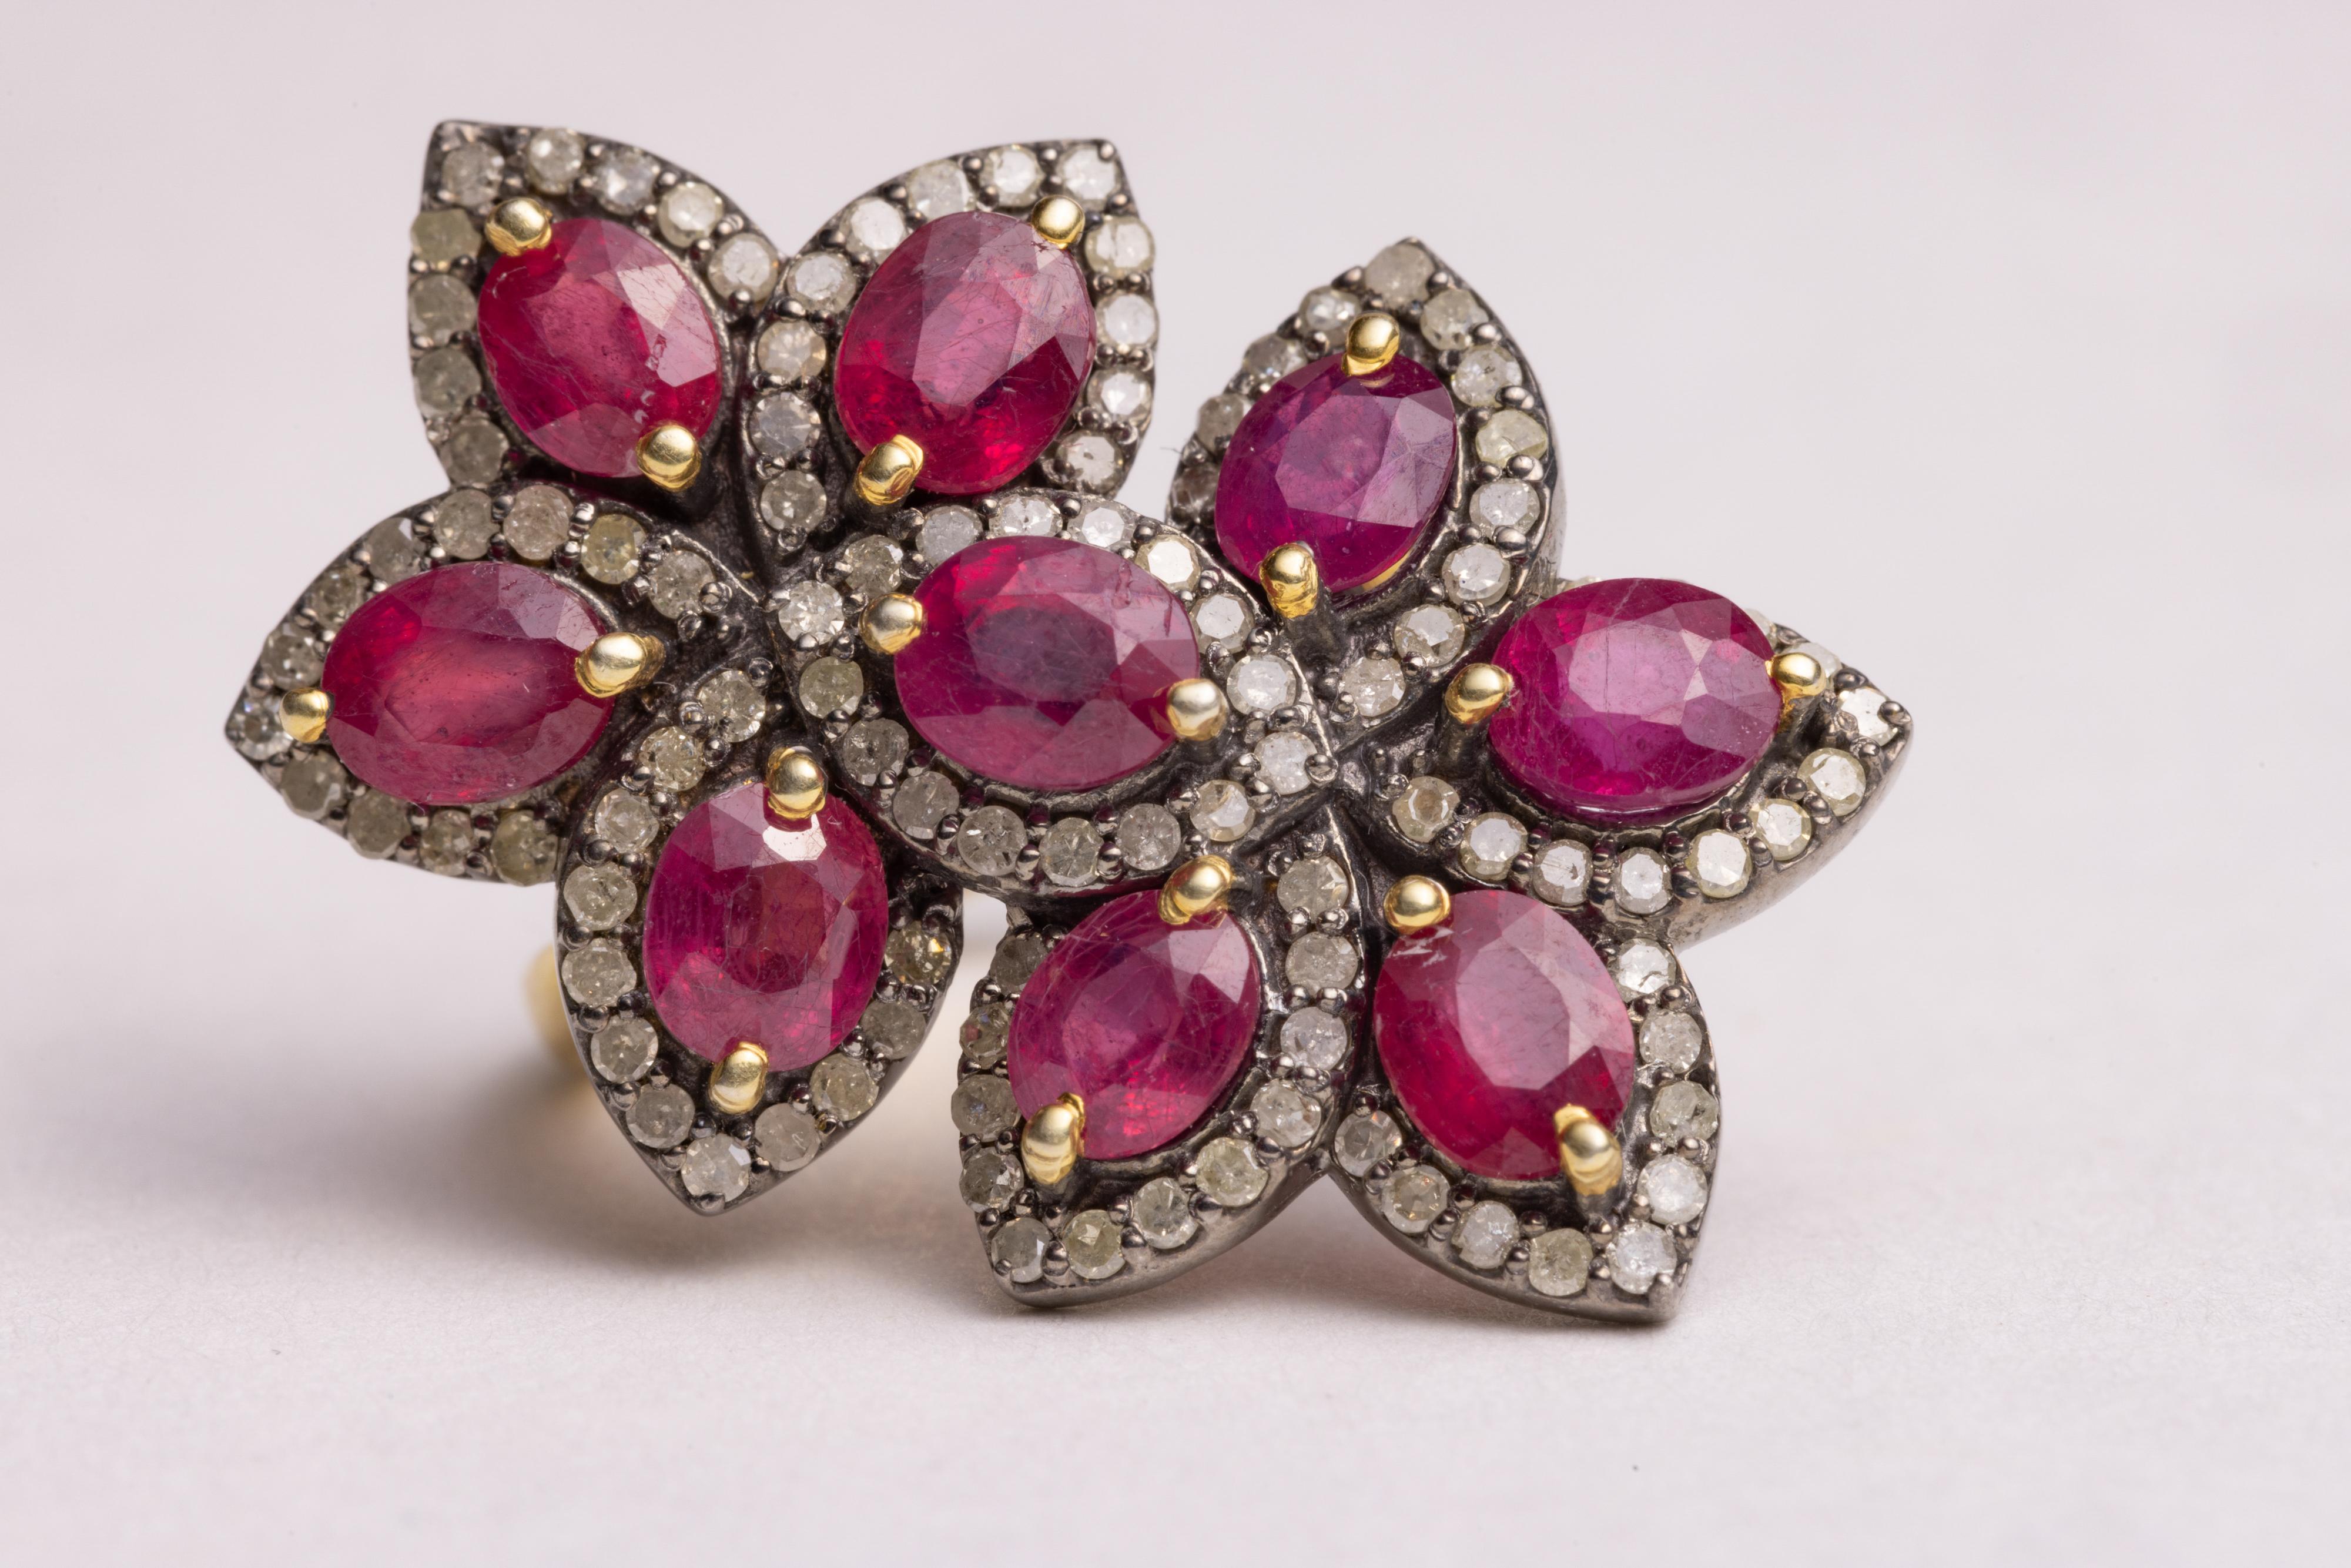 A spectacular double flower cocktail ring.  Faceted, marquise rubies bordered with pave`-set, round brilliant cut diamonds set in sterling silver.  Burmese rubies tend to be more on the pink side.  Carat weight of rubies is 5.17; diamonds total .92